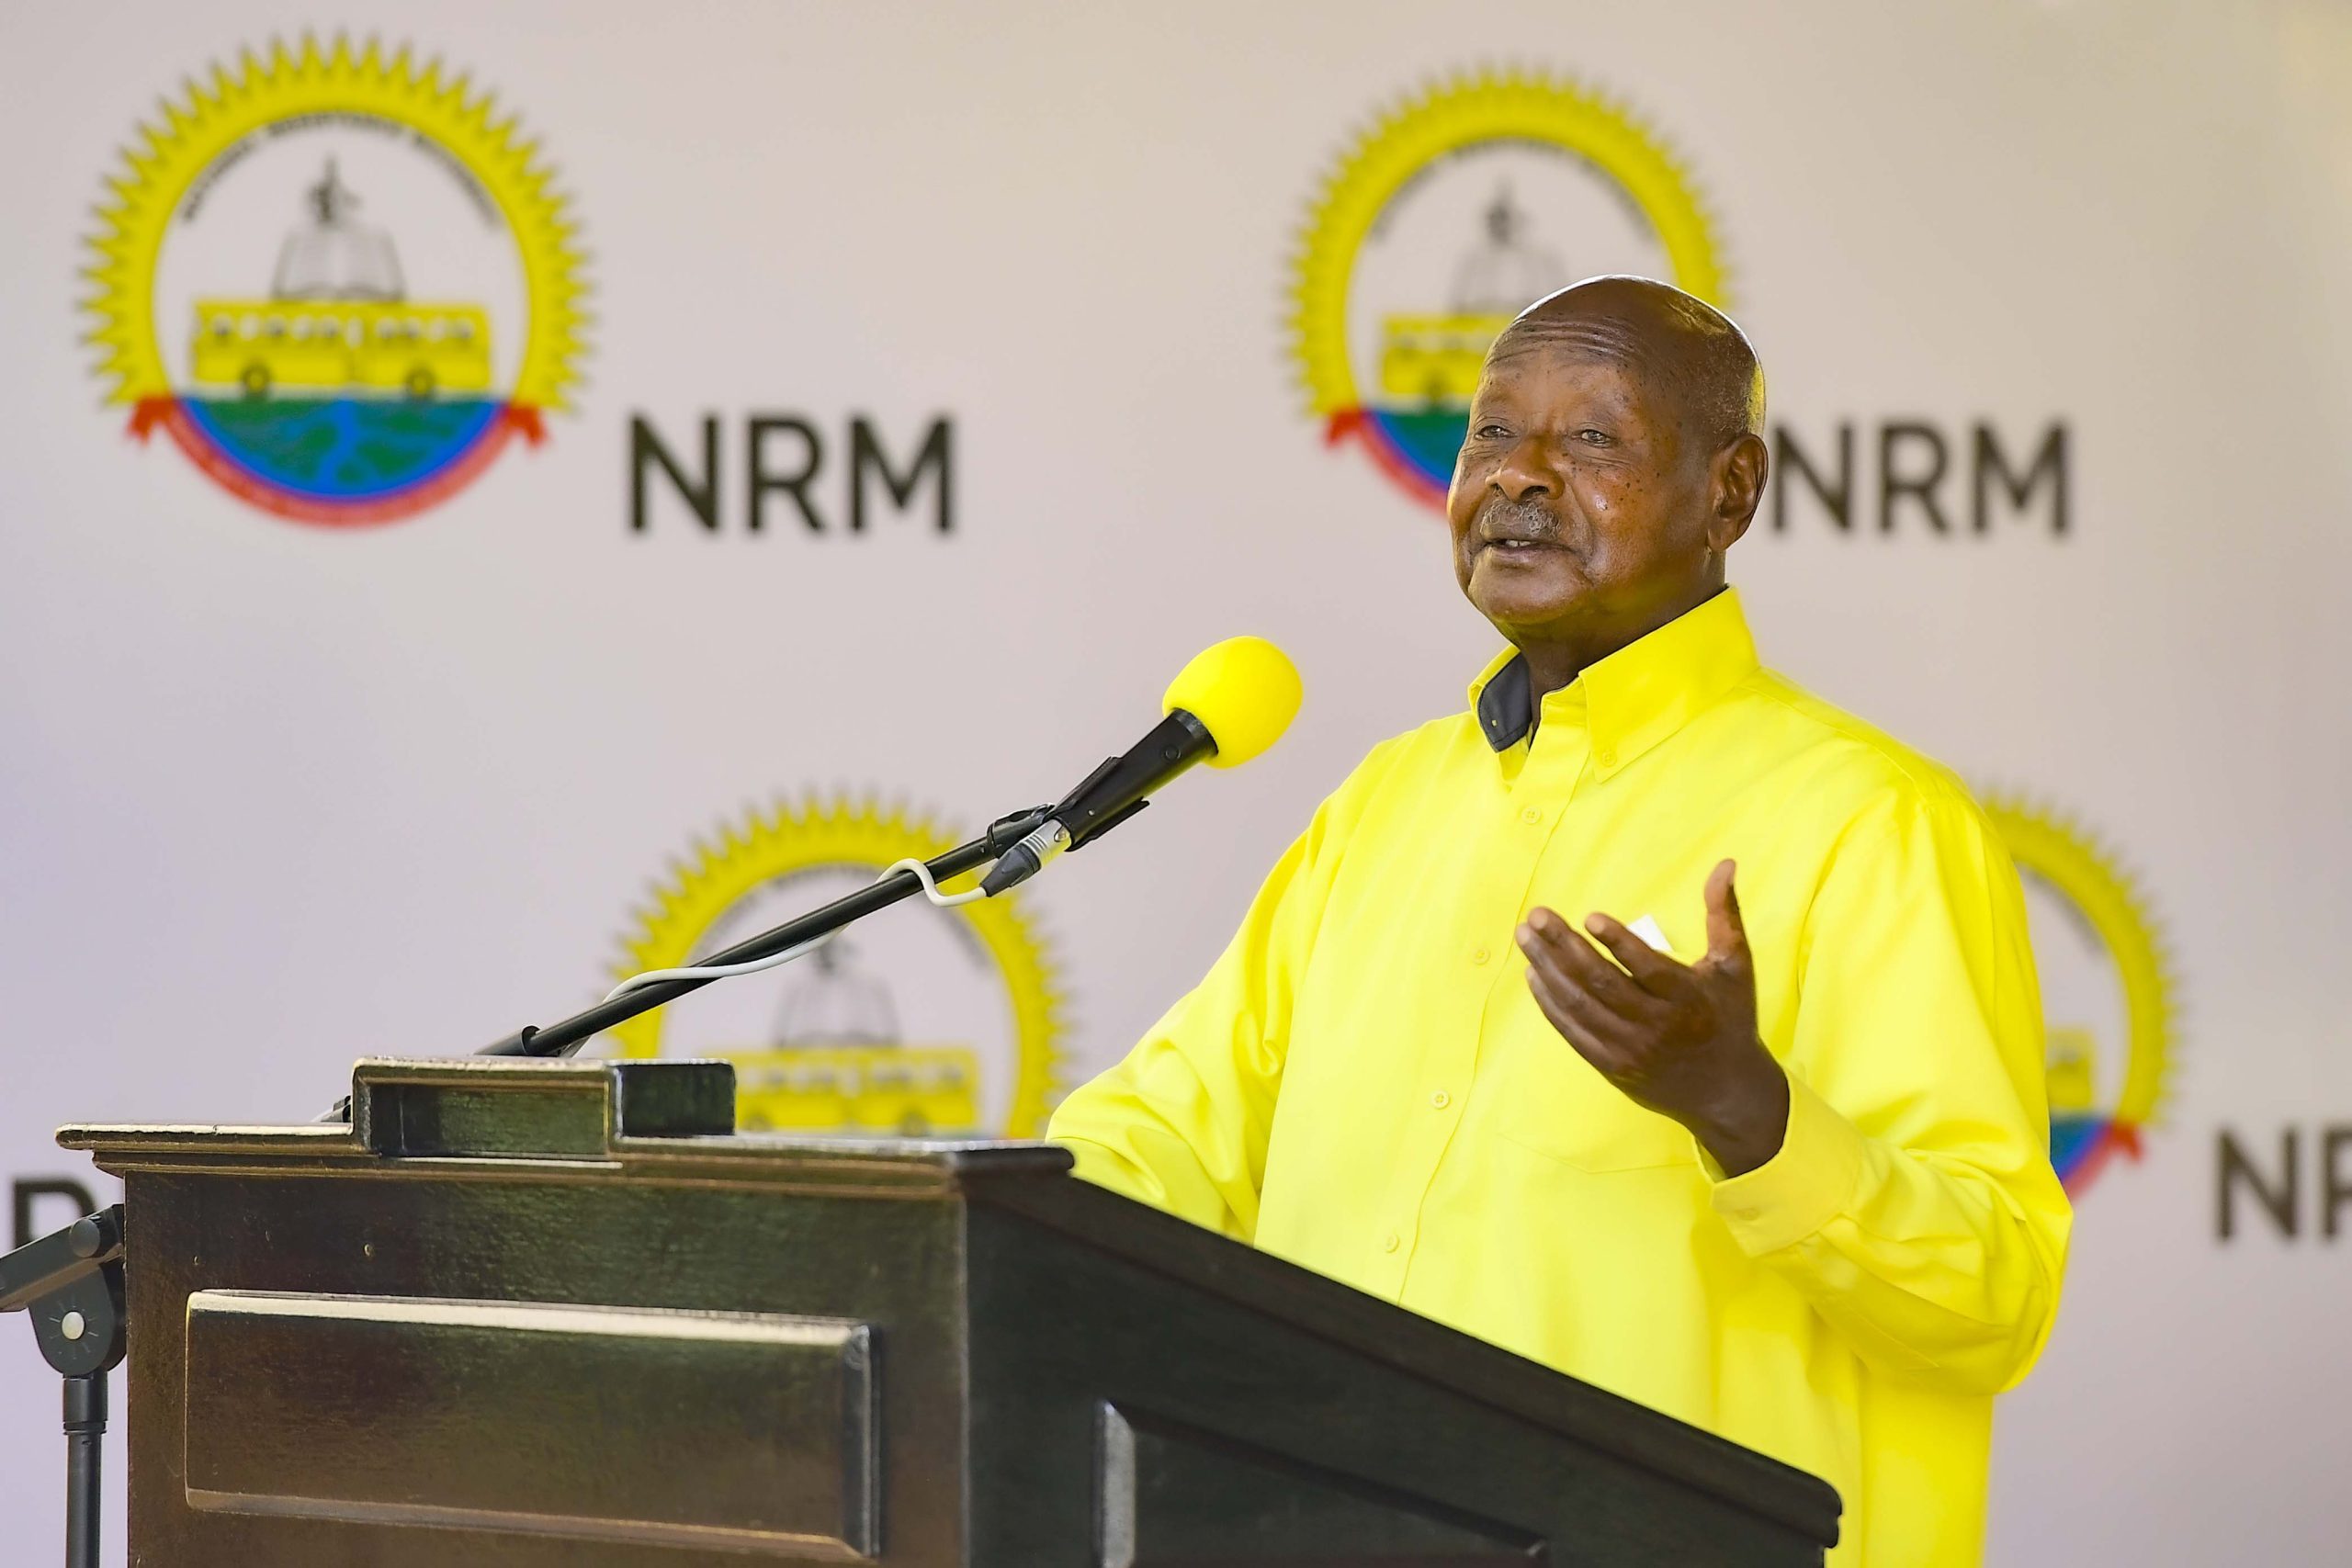 Museveni Launches Update of NRM Members Register and Warns Against Opposition Interference in Party Primaries